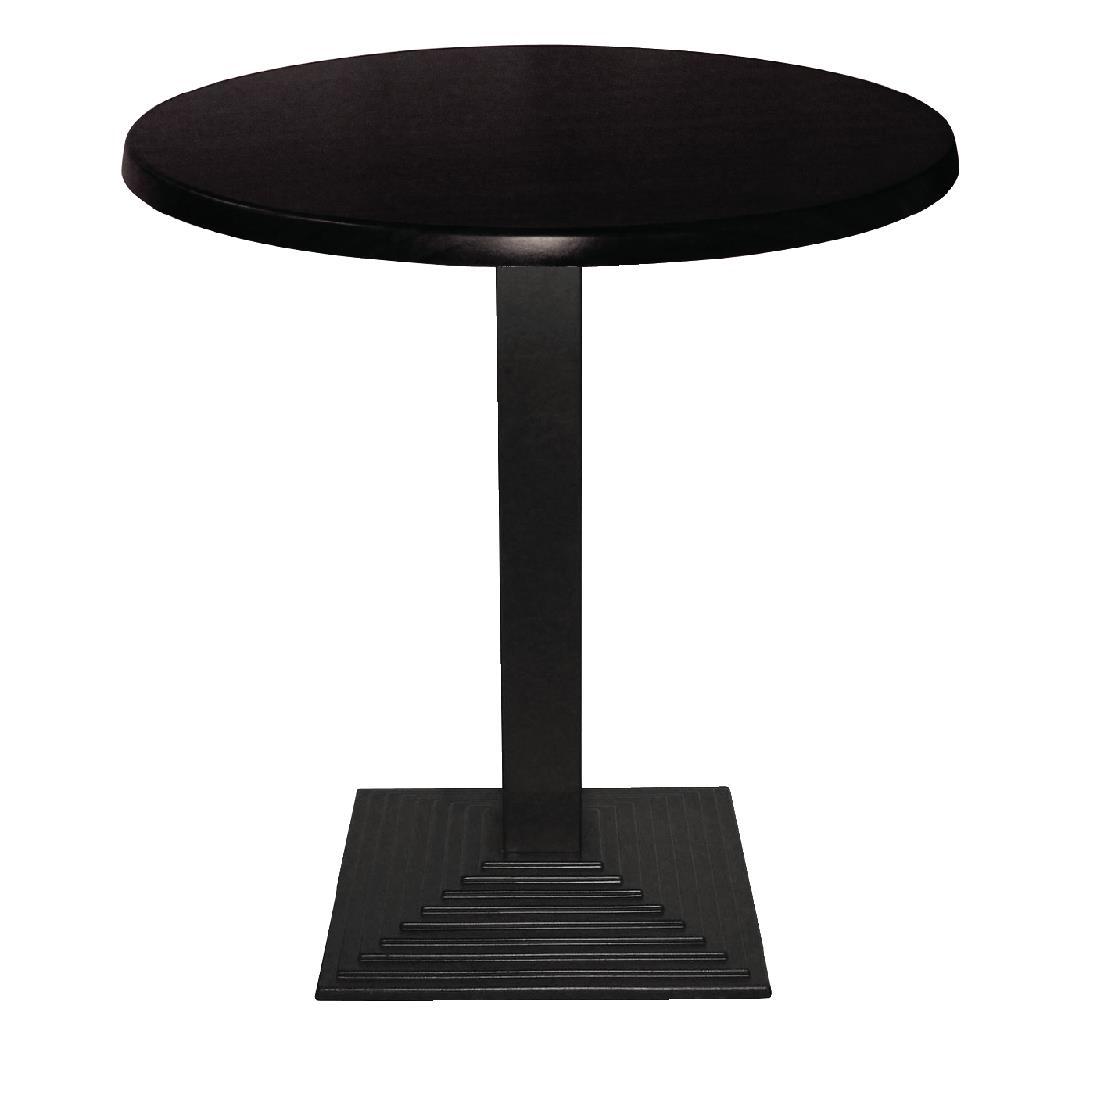 Werzalit Pre-drilled Round Table Top Black 800mm - CC513  - 3